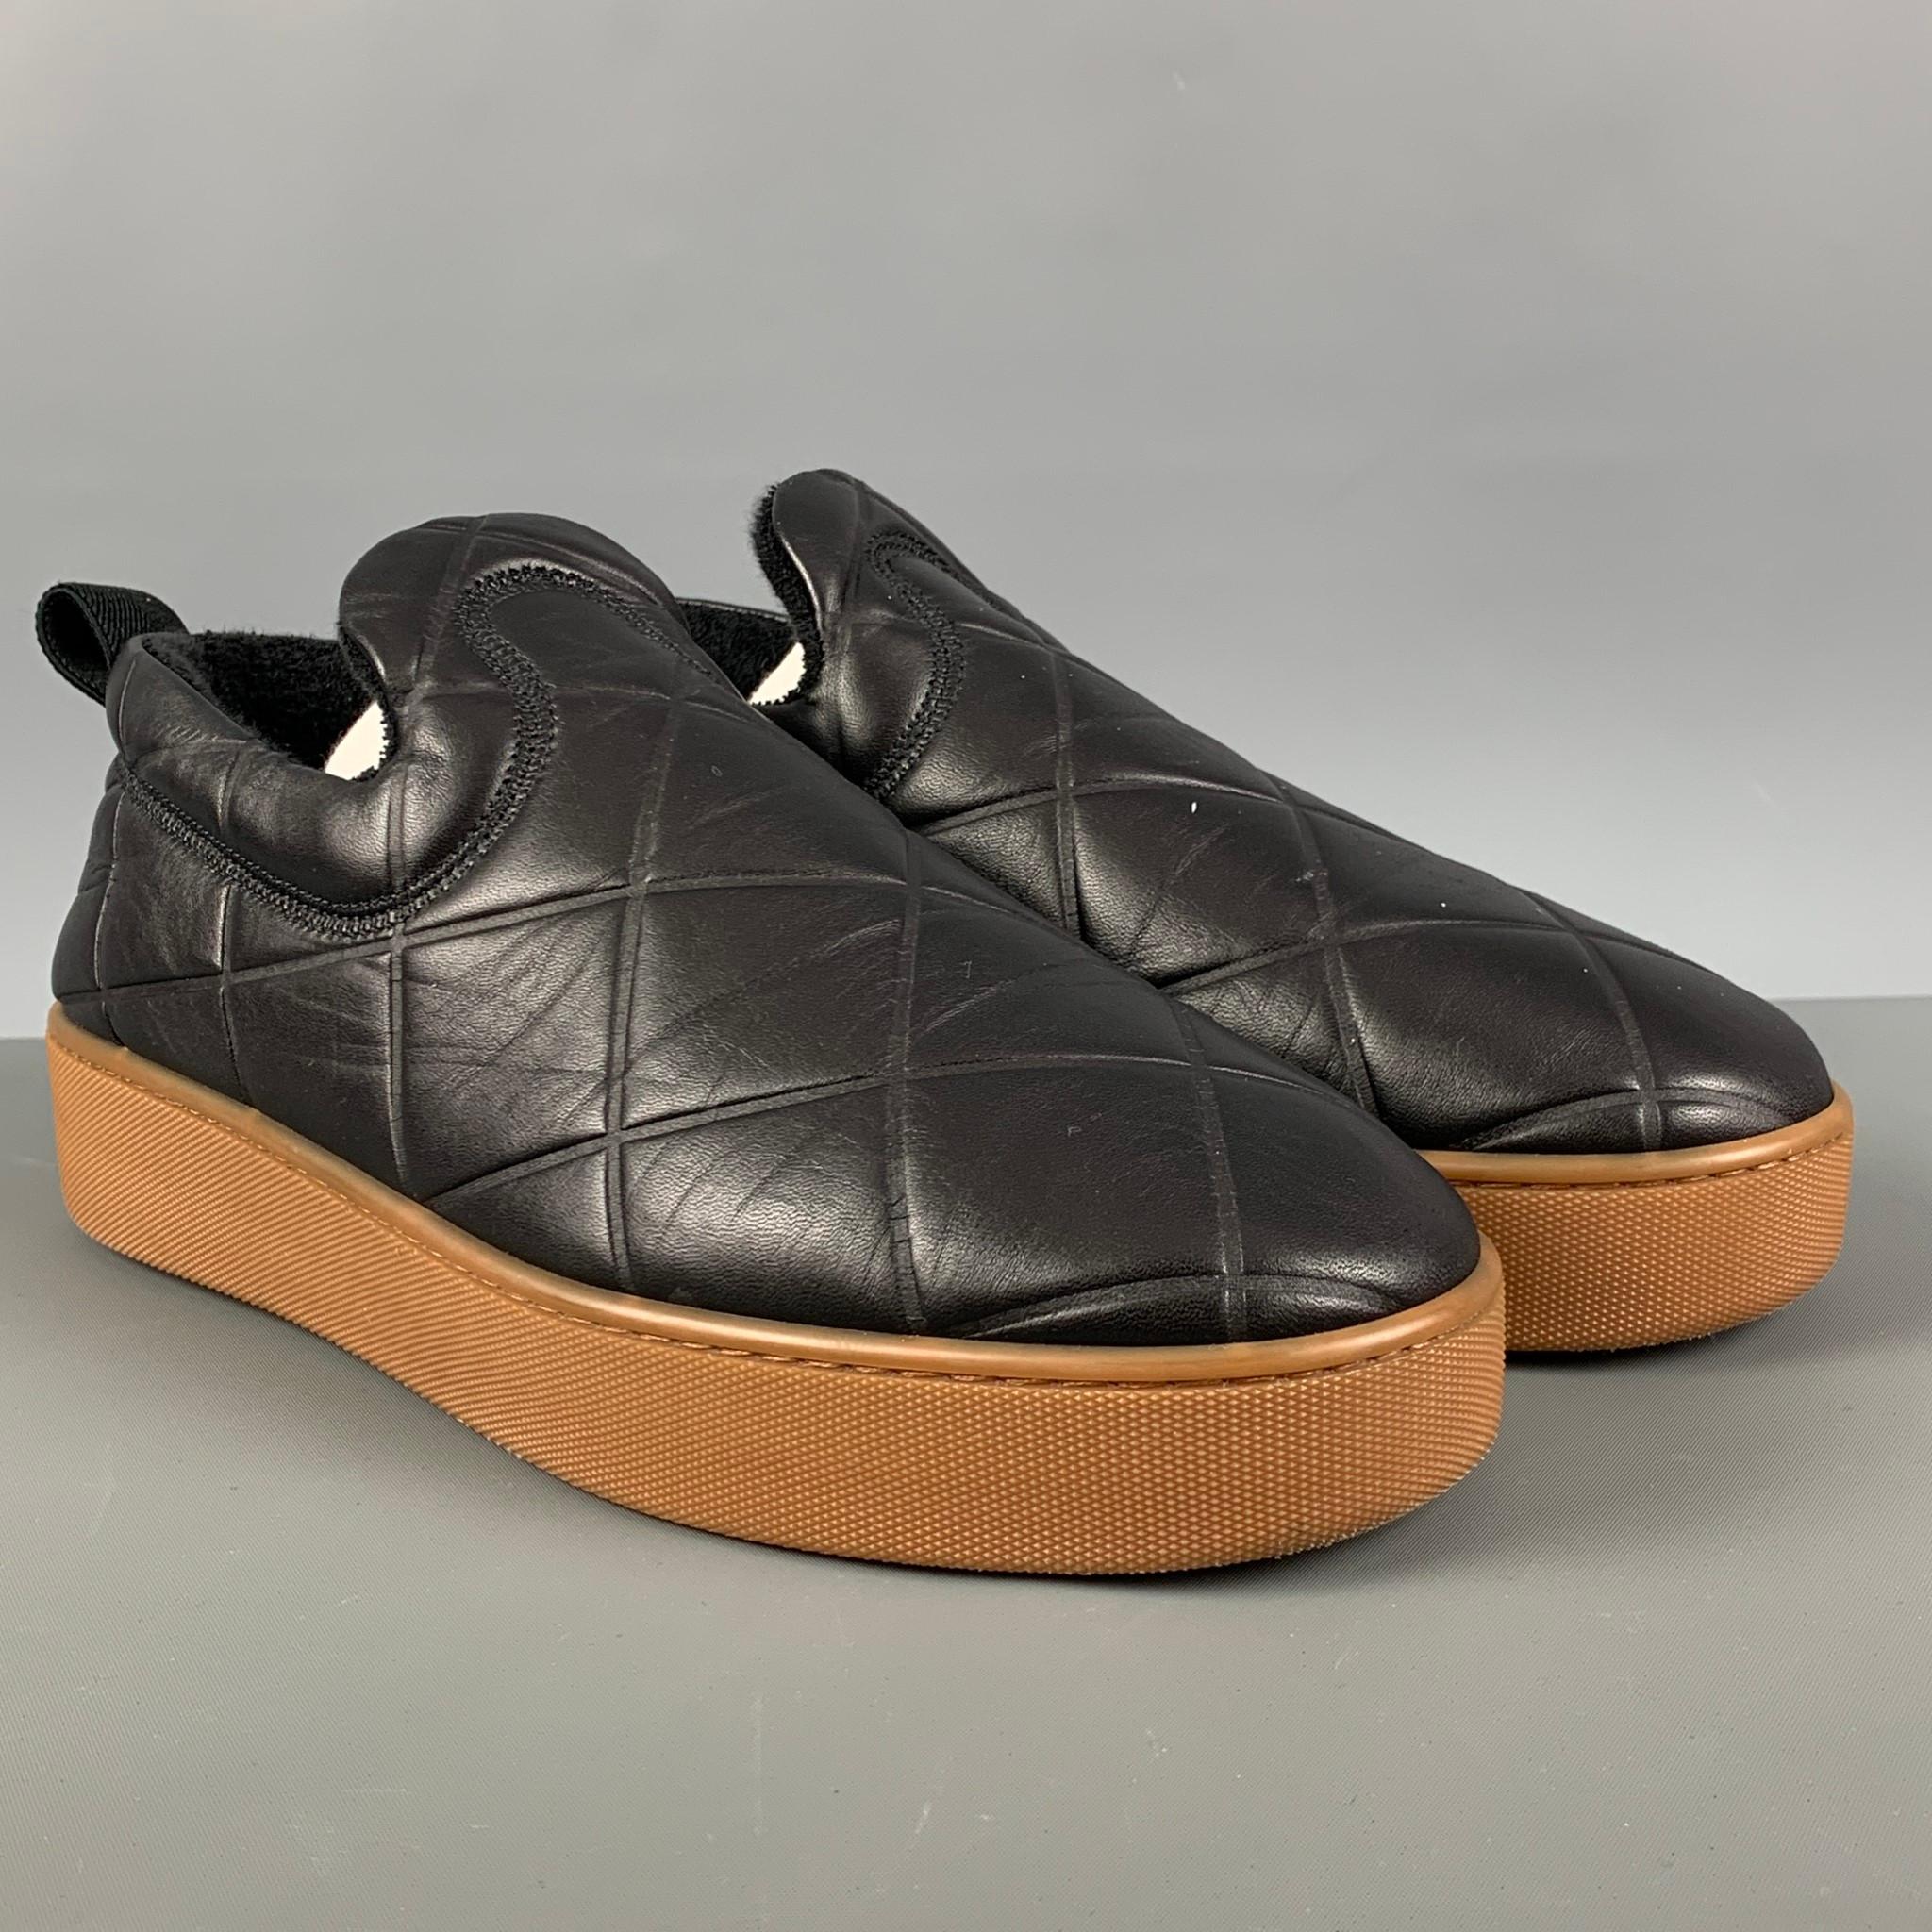 BOTTEGA VENETA 'The QUILT' loafers comes in a black lamb skin leather featuring a low-top, quilted pattern, tonal terry cloth lining, textured rubber midsole in tan and threaded rubber outsole in tan. Made in Italy. Comes with Dusty Bag.

Excellent